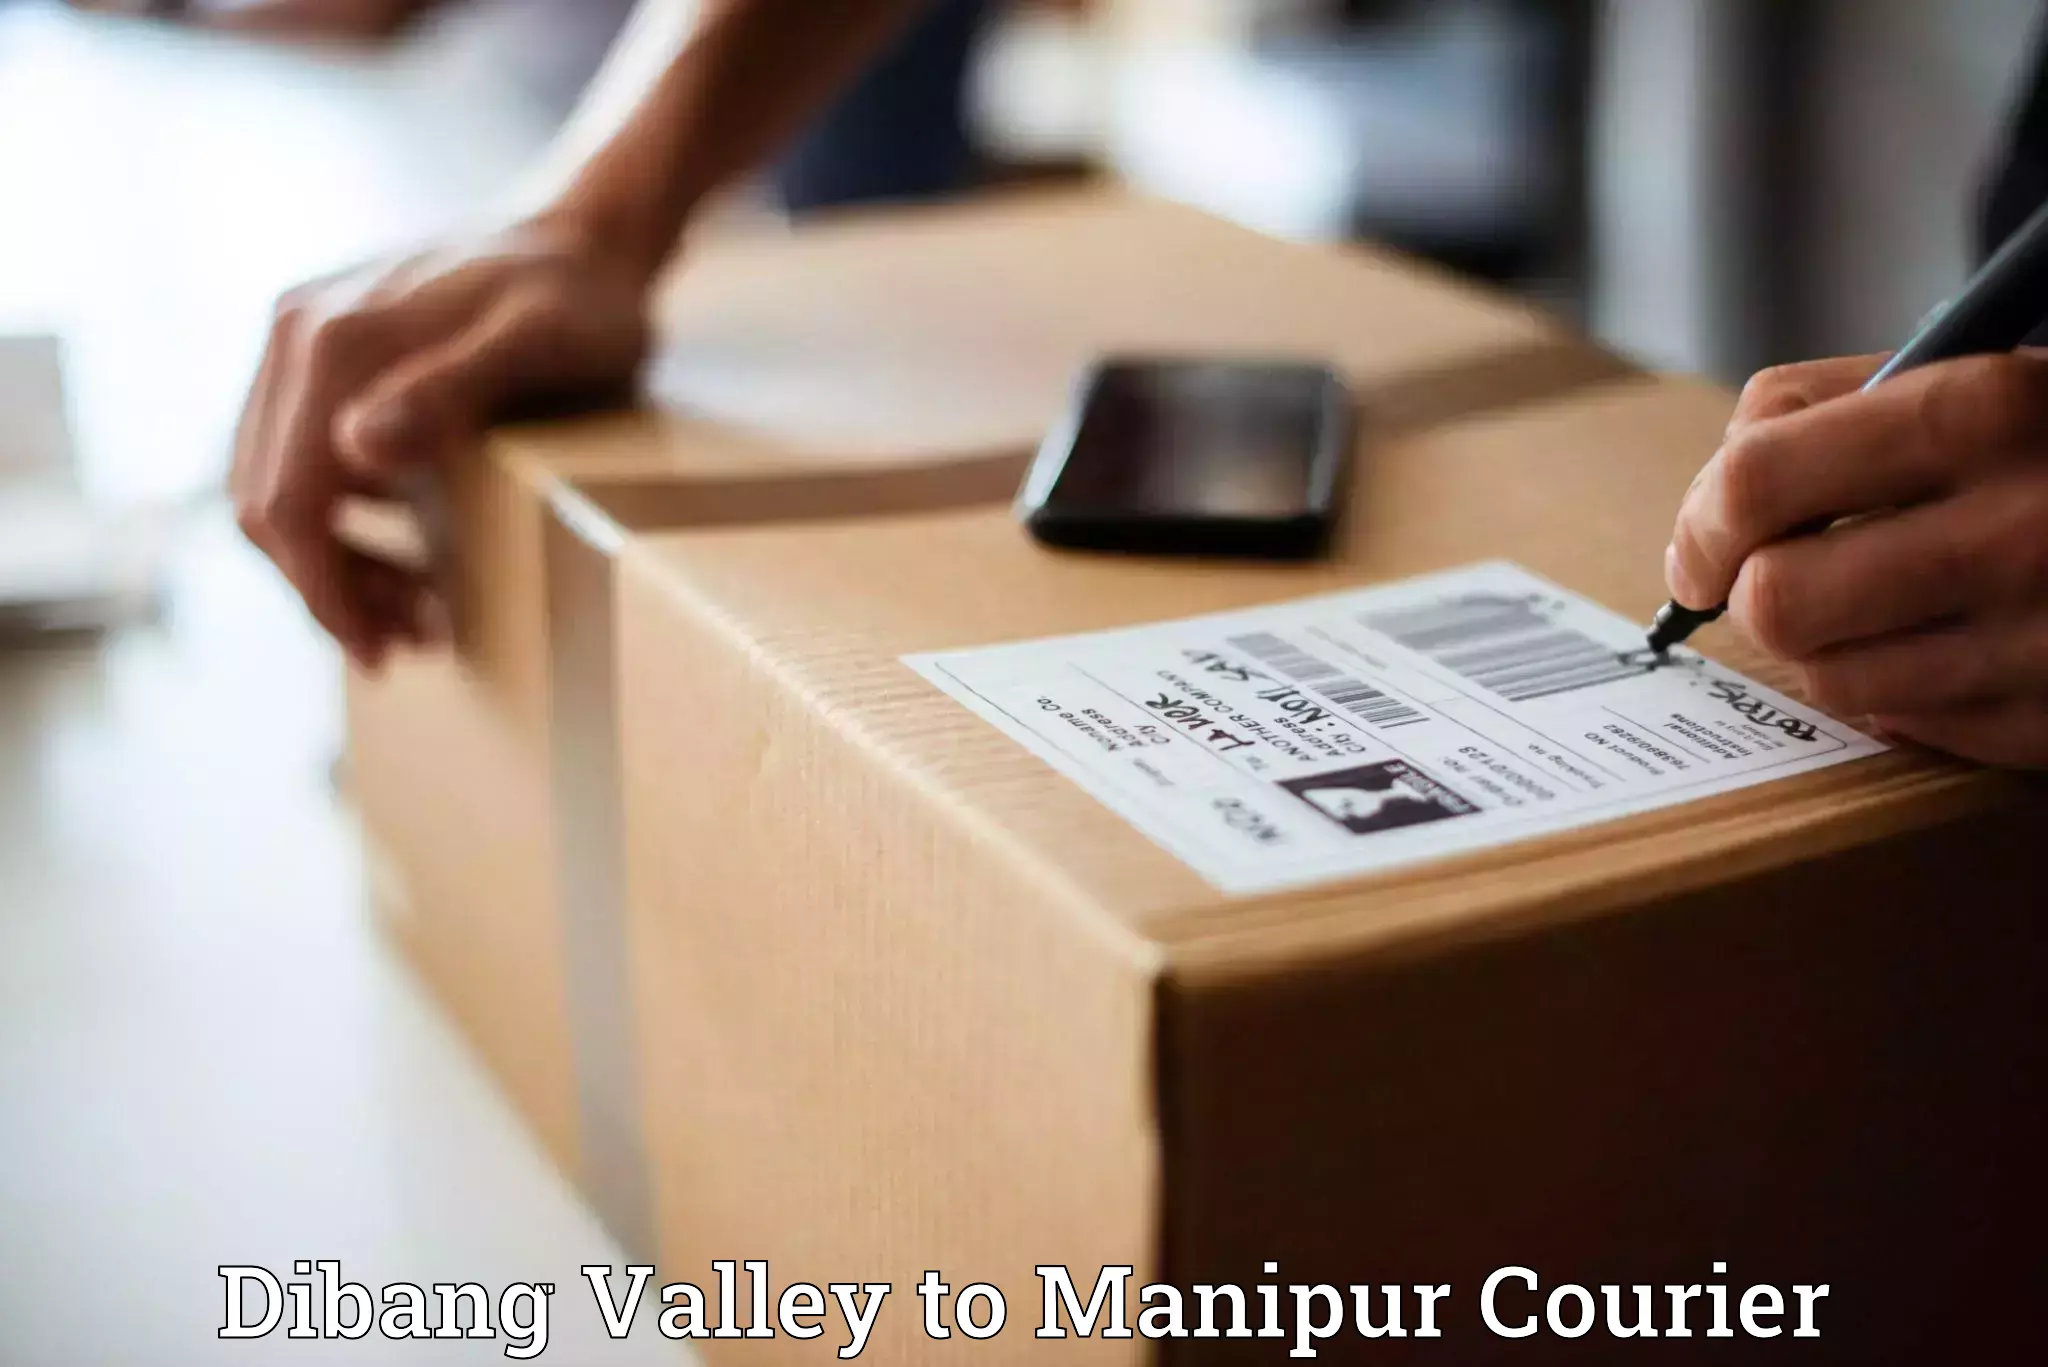 Smart shipping technology Dibang Valley to Manipur